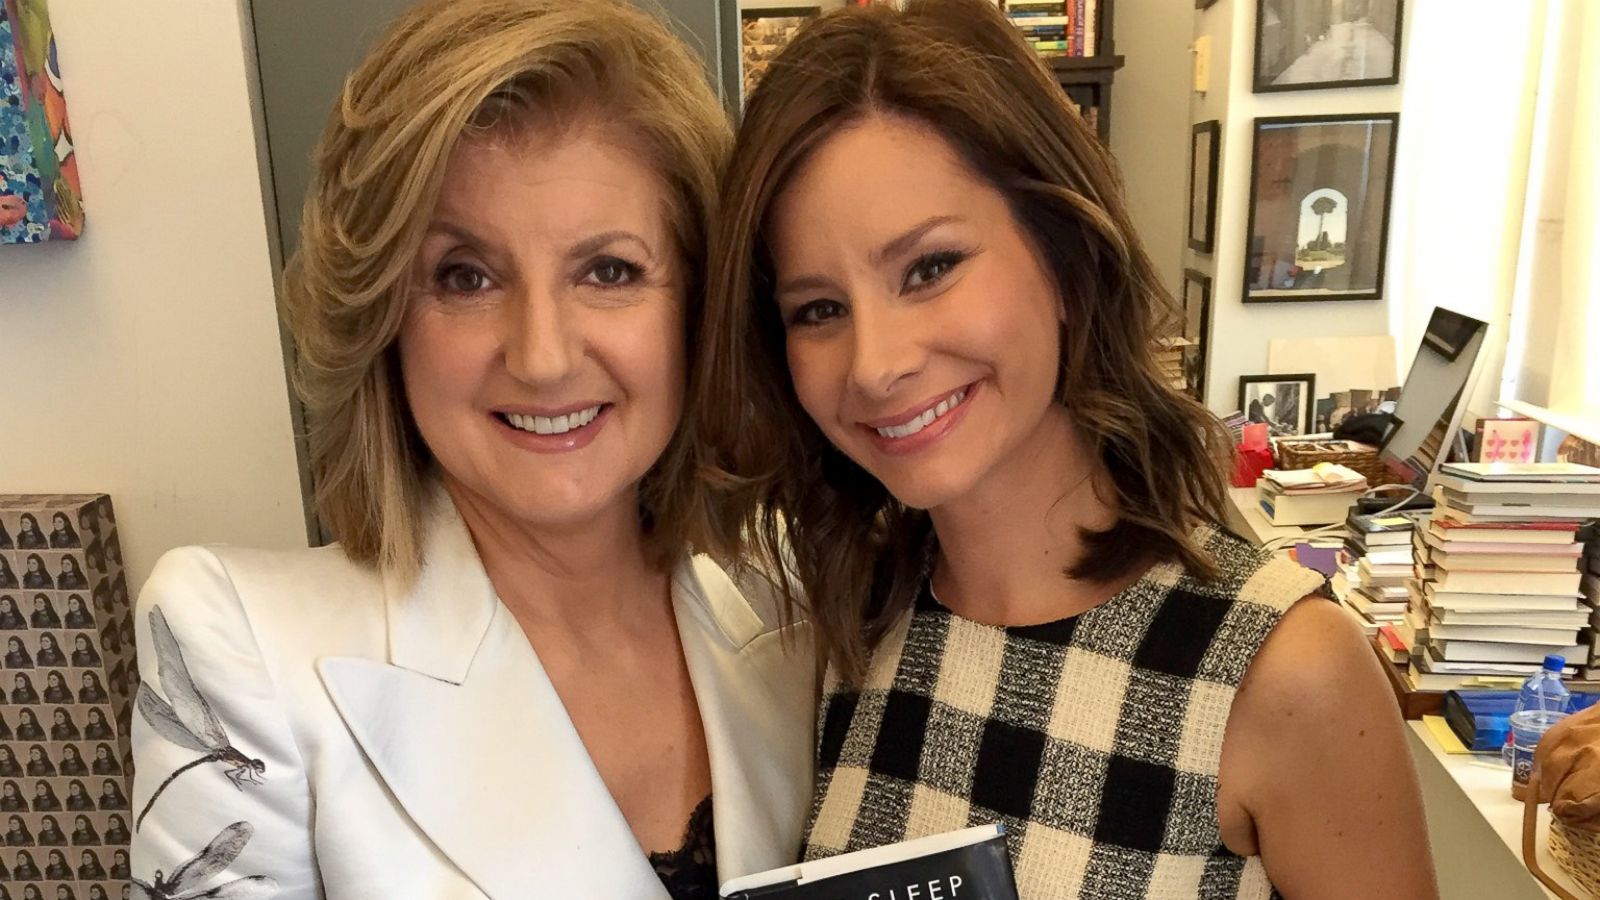 5 Things You Might Not Know About Arianna Huffington